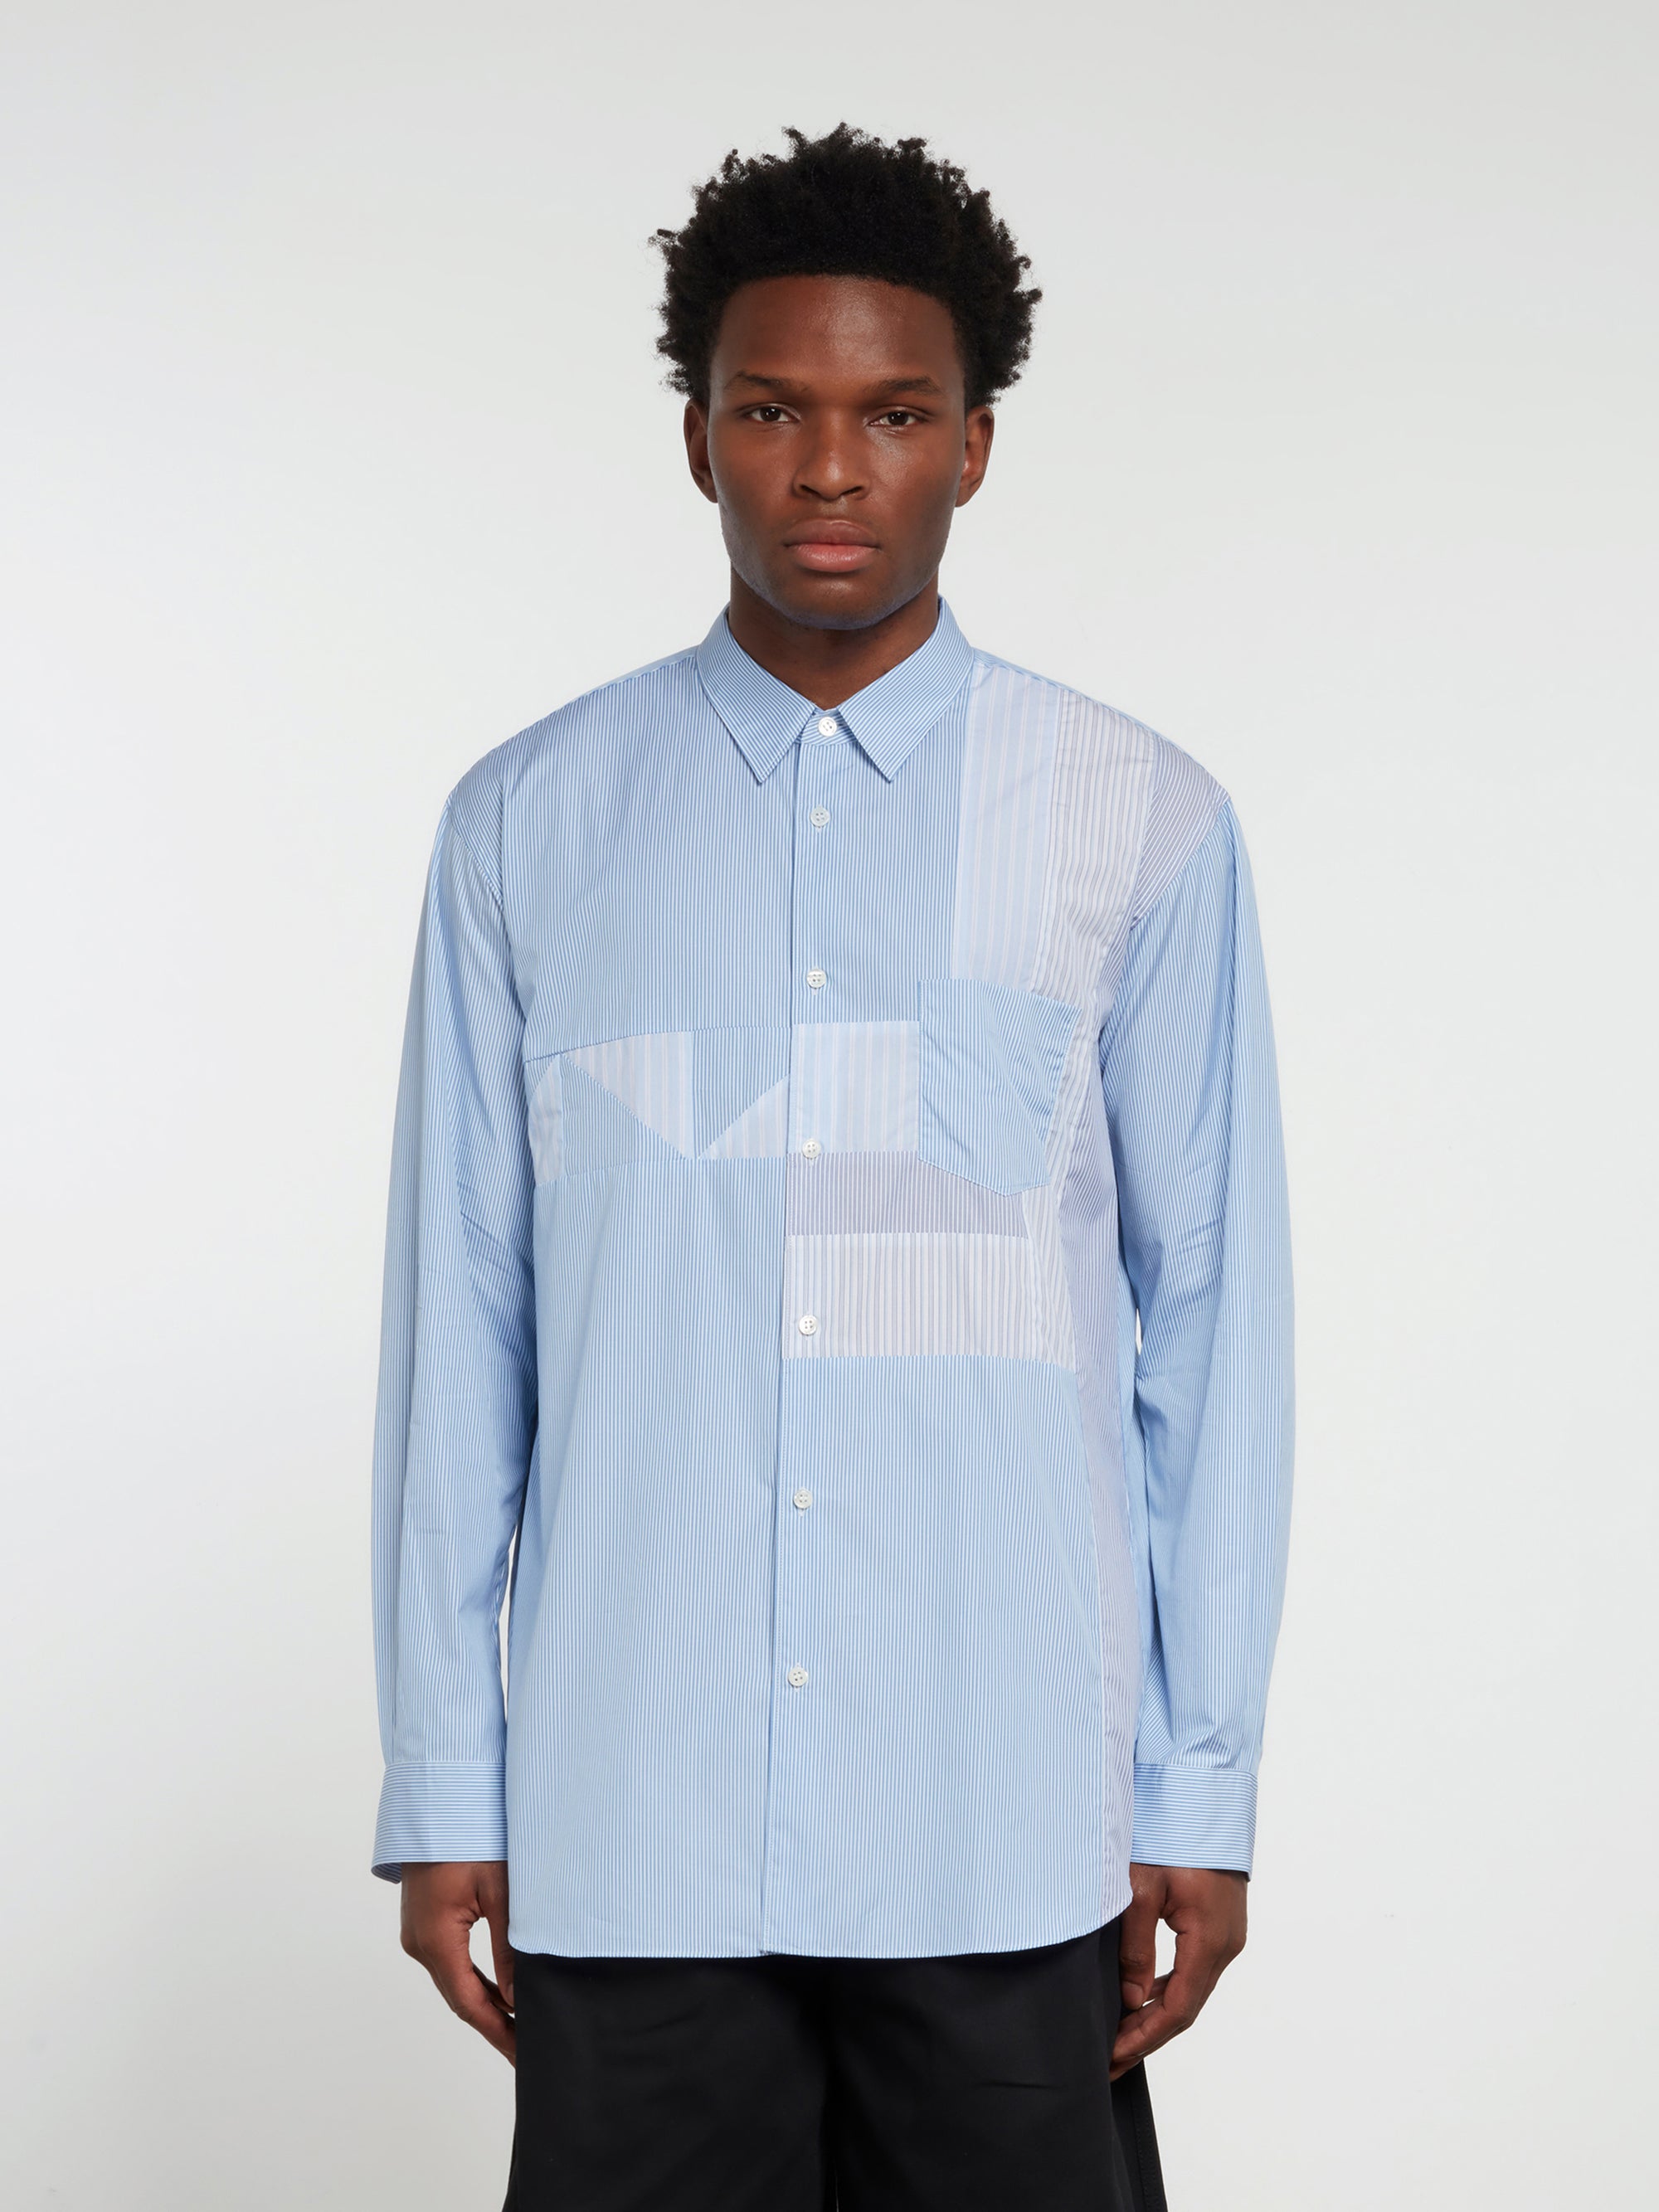 CDG Shirt Forever - Classic Fit Patchwork Stripe Shirt - (Stripe/Mix) view 2